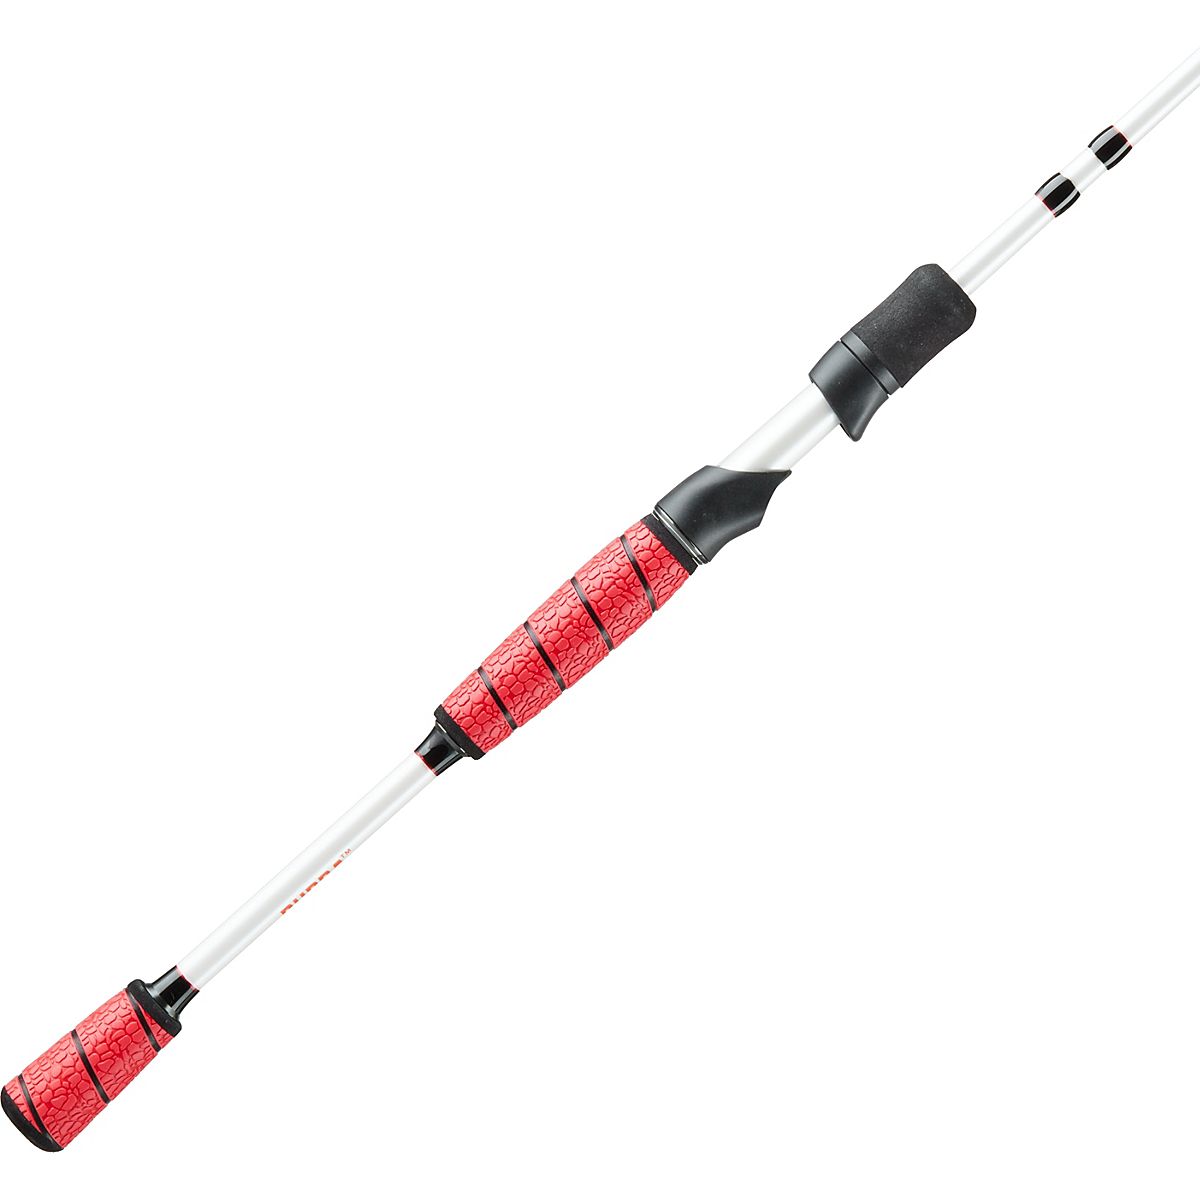 Bubba Inshore Tidal 7 ft 6 in MH Fast Spinning Rod | Academy